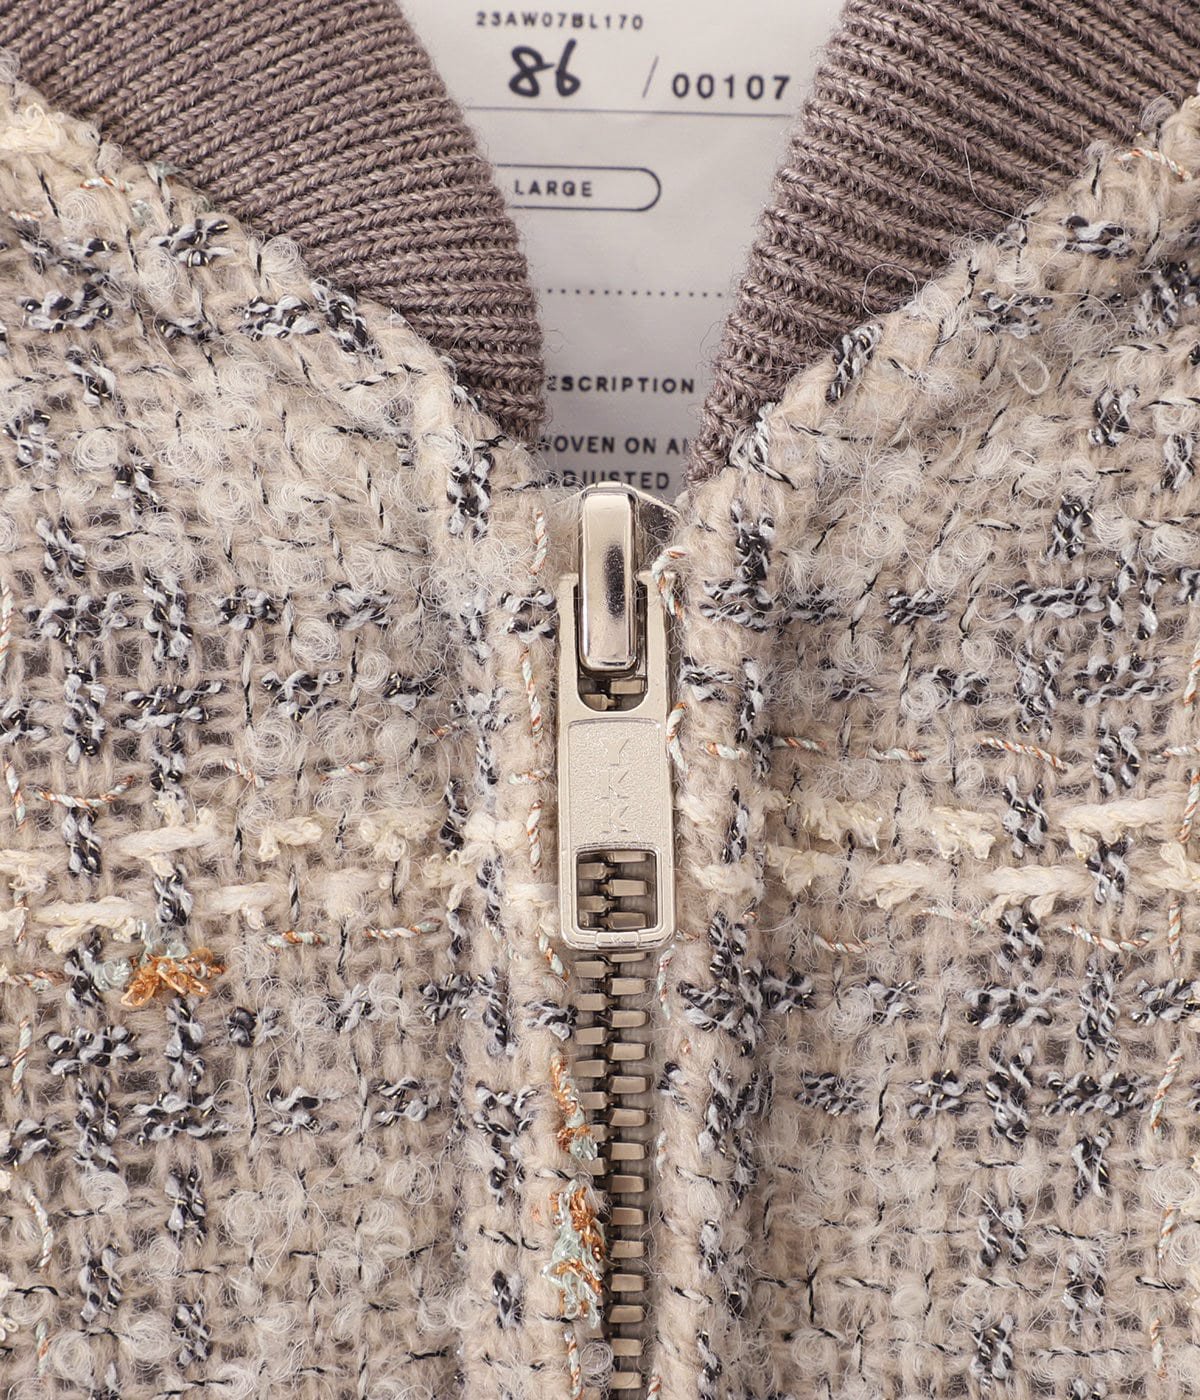 TWEED SOUVENIOR JACKET | doublet(ダブレット) / アウター ブルゾン ...